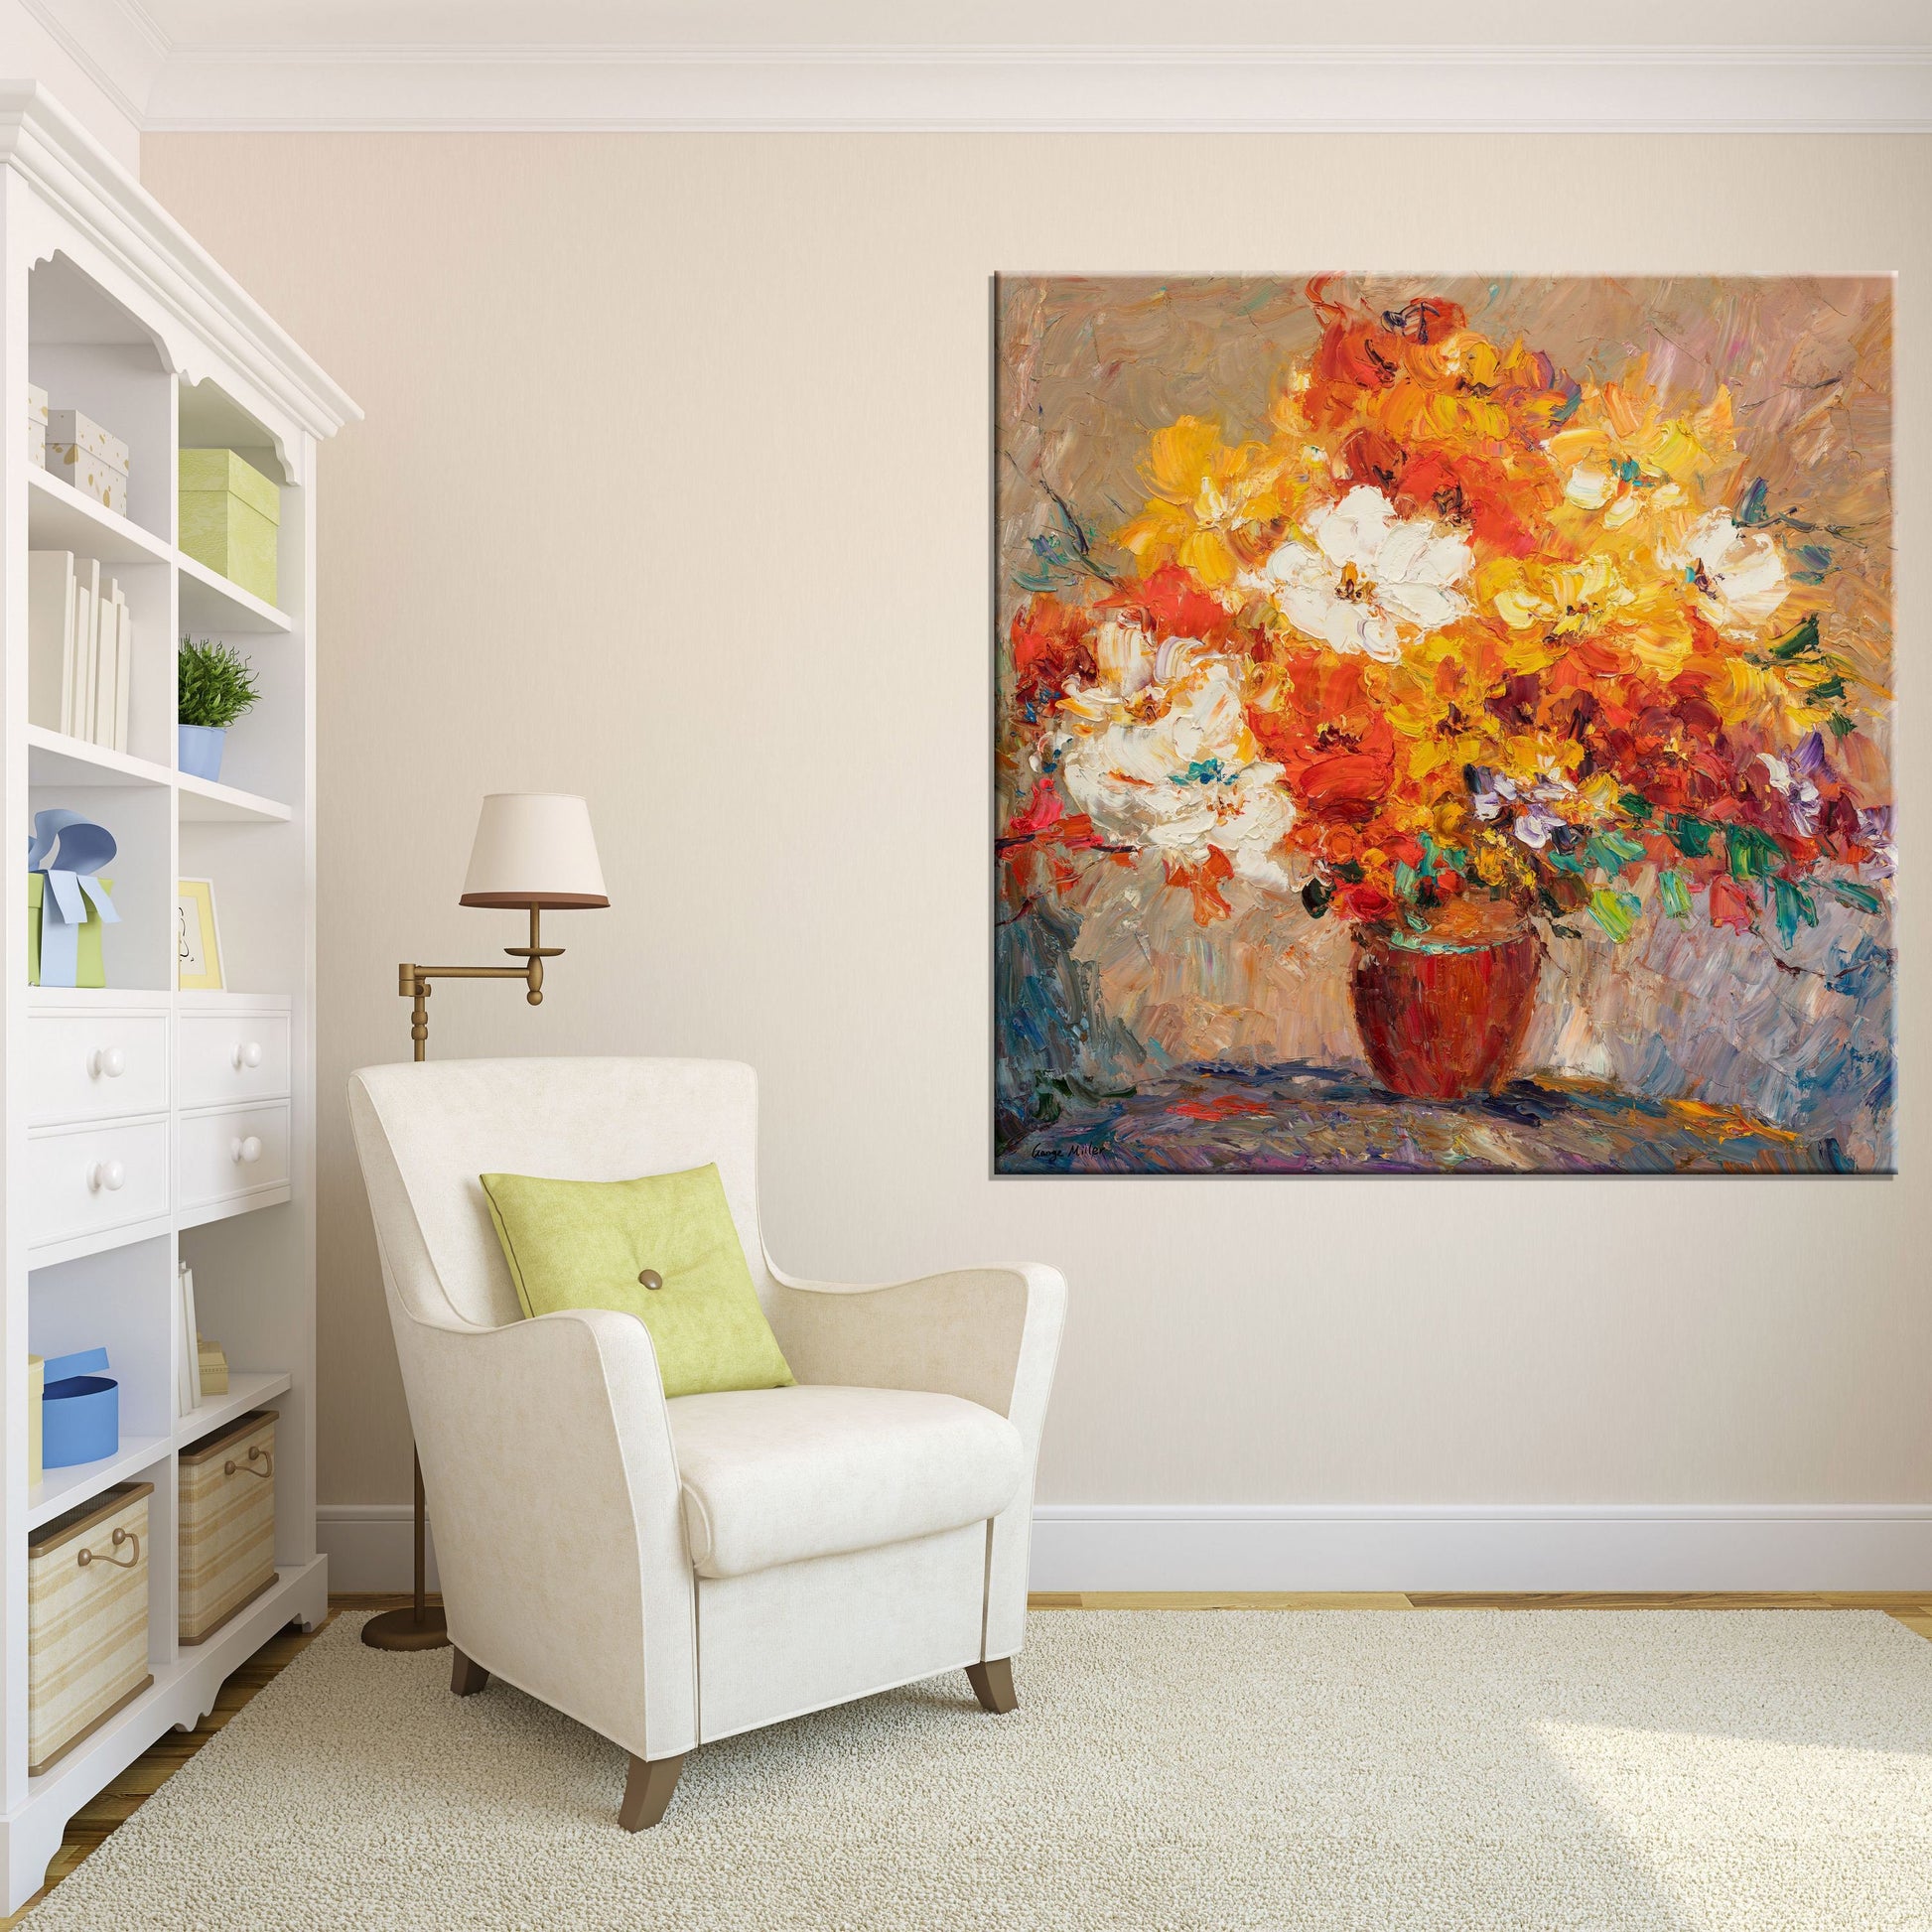 Large Canvas Painting, Flower Painting, Modern Painting, Oil Painting Original, Abstract Art, Bedroom Decor, Modern Wall Art, Palette Knife